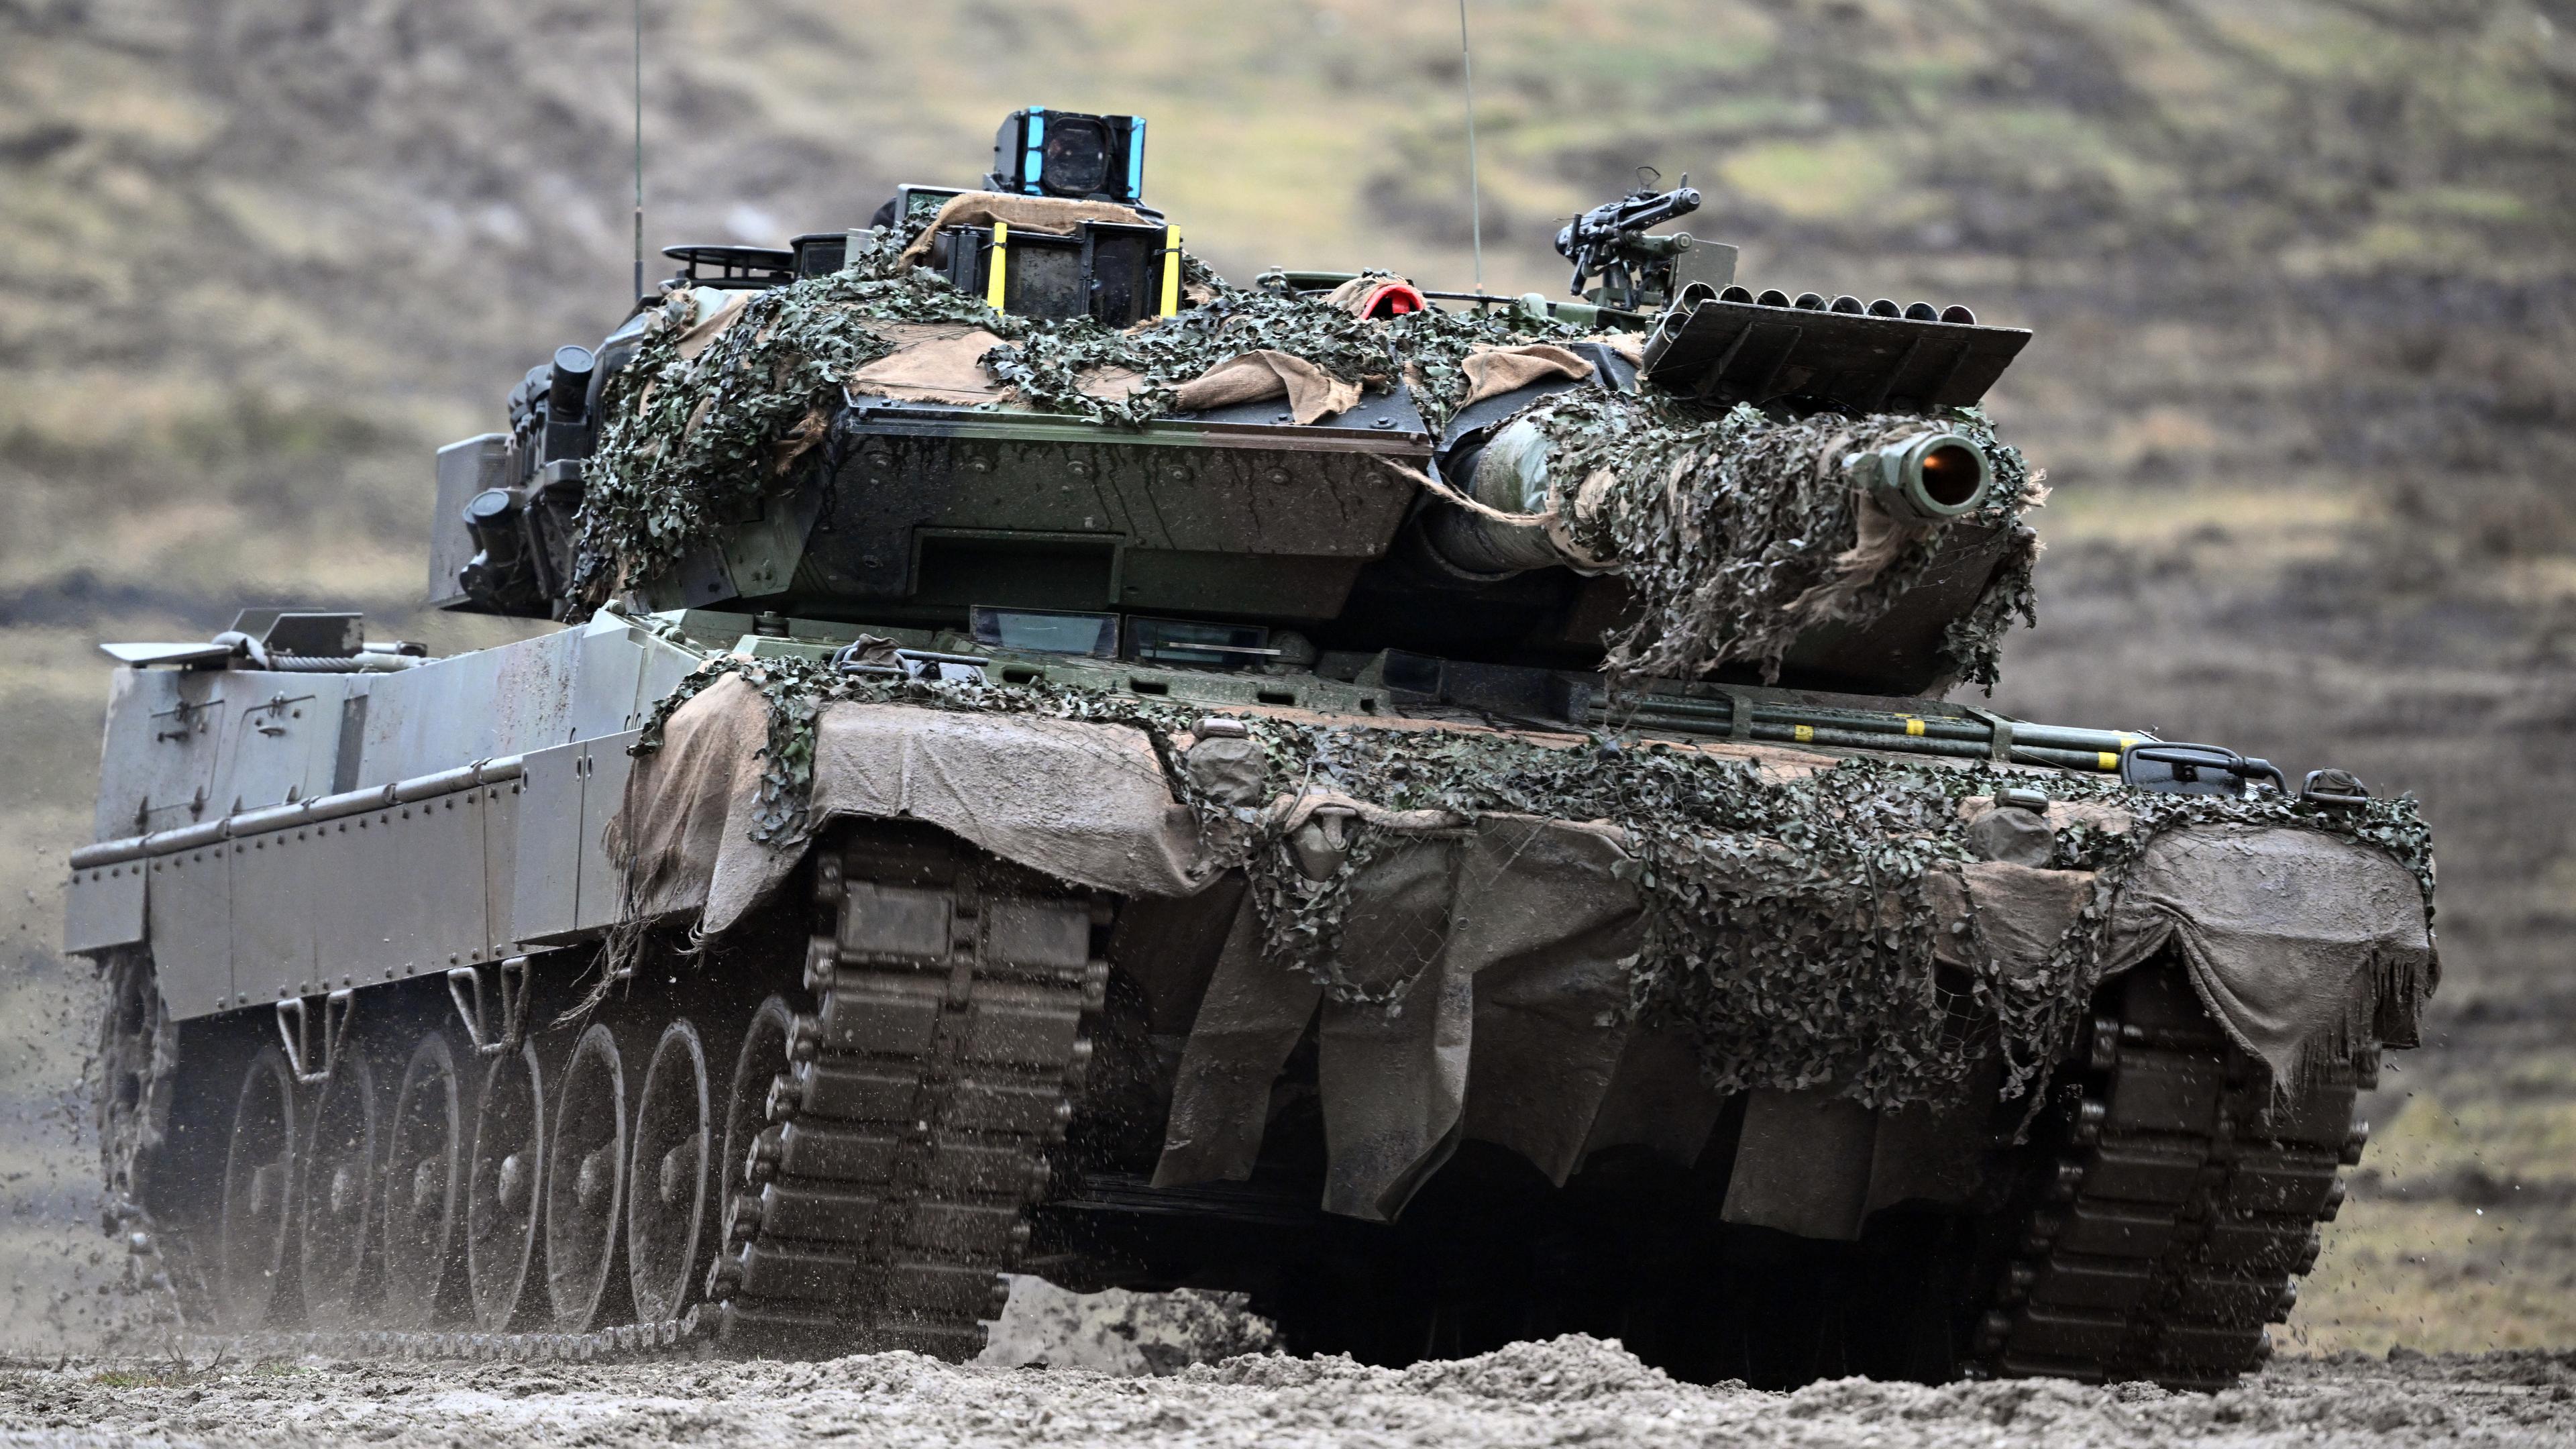 A Leopard 2A6 from the 203rd tank battalion of the Bundeswehr passes over the Senne military training ground.